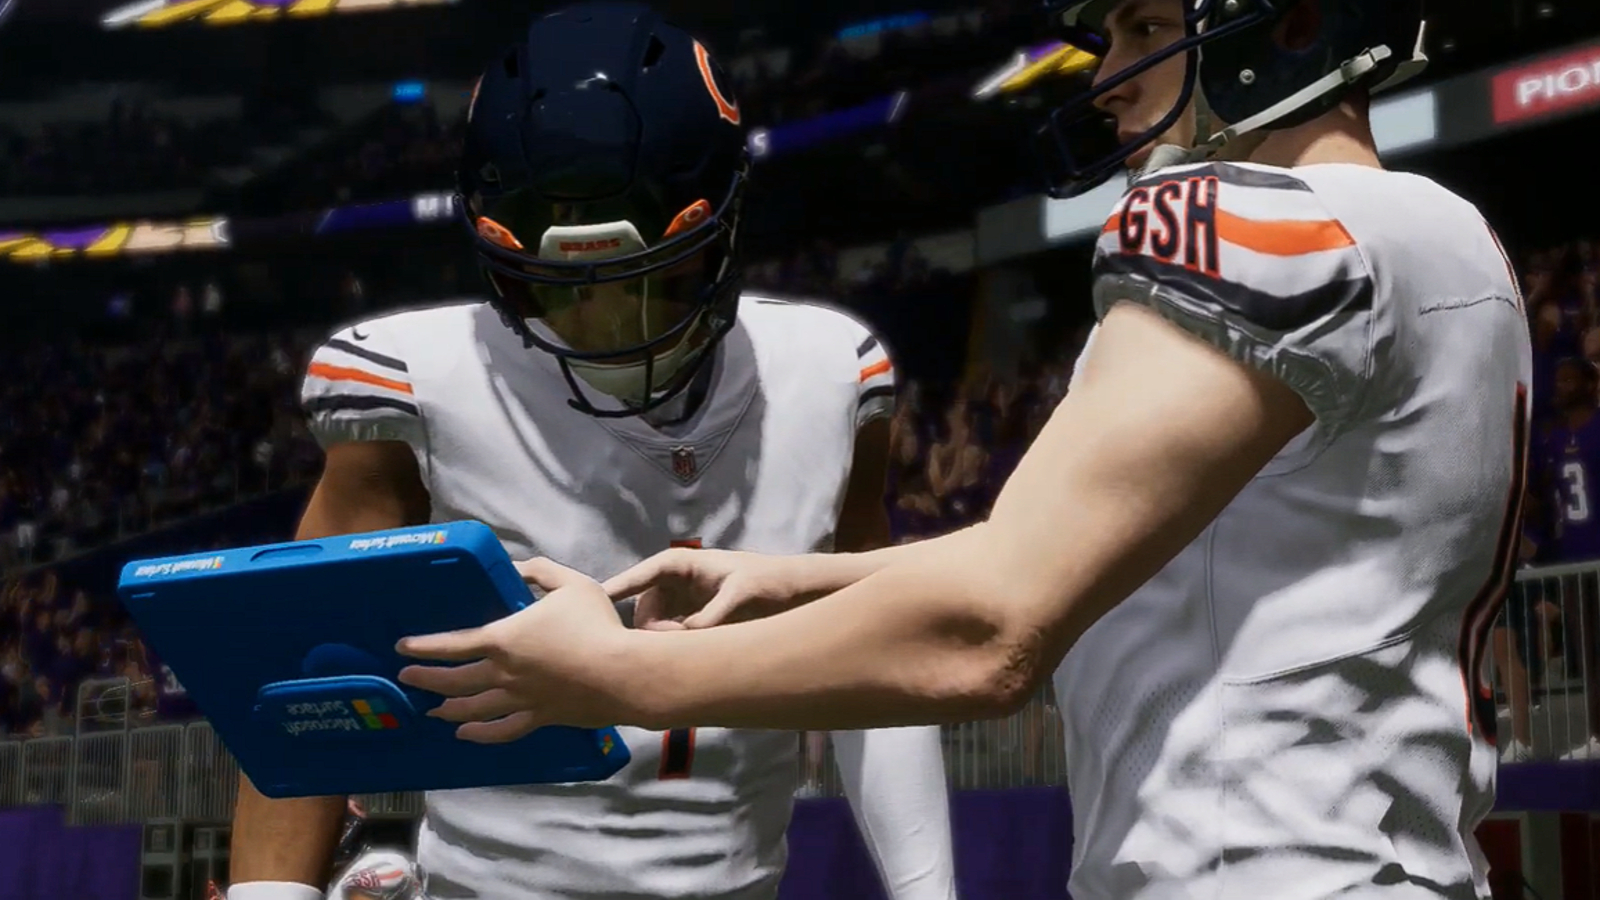 Madden 23 player goes viral for executing the “greatest” punt ever